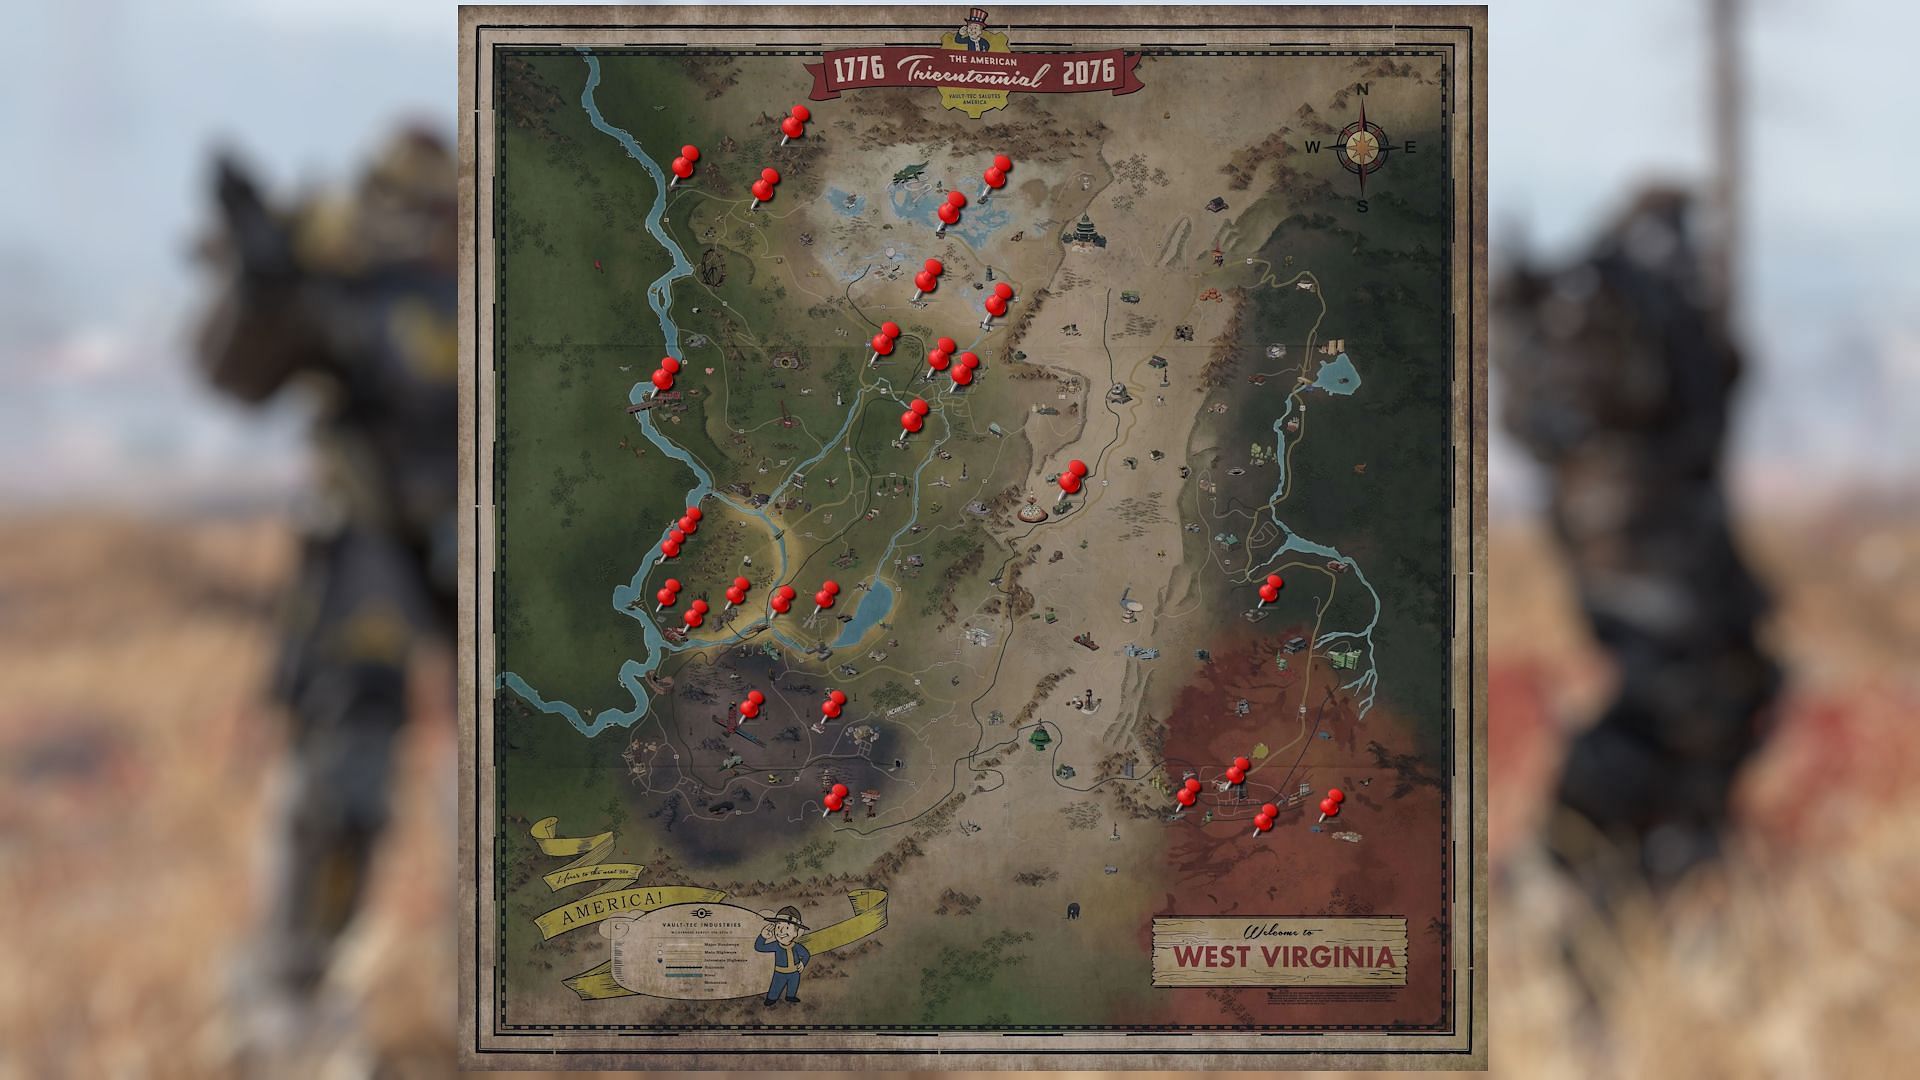 All Power Armor locations on the Fallout 76 map (Image via Bethesda Softworks)